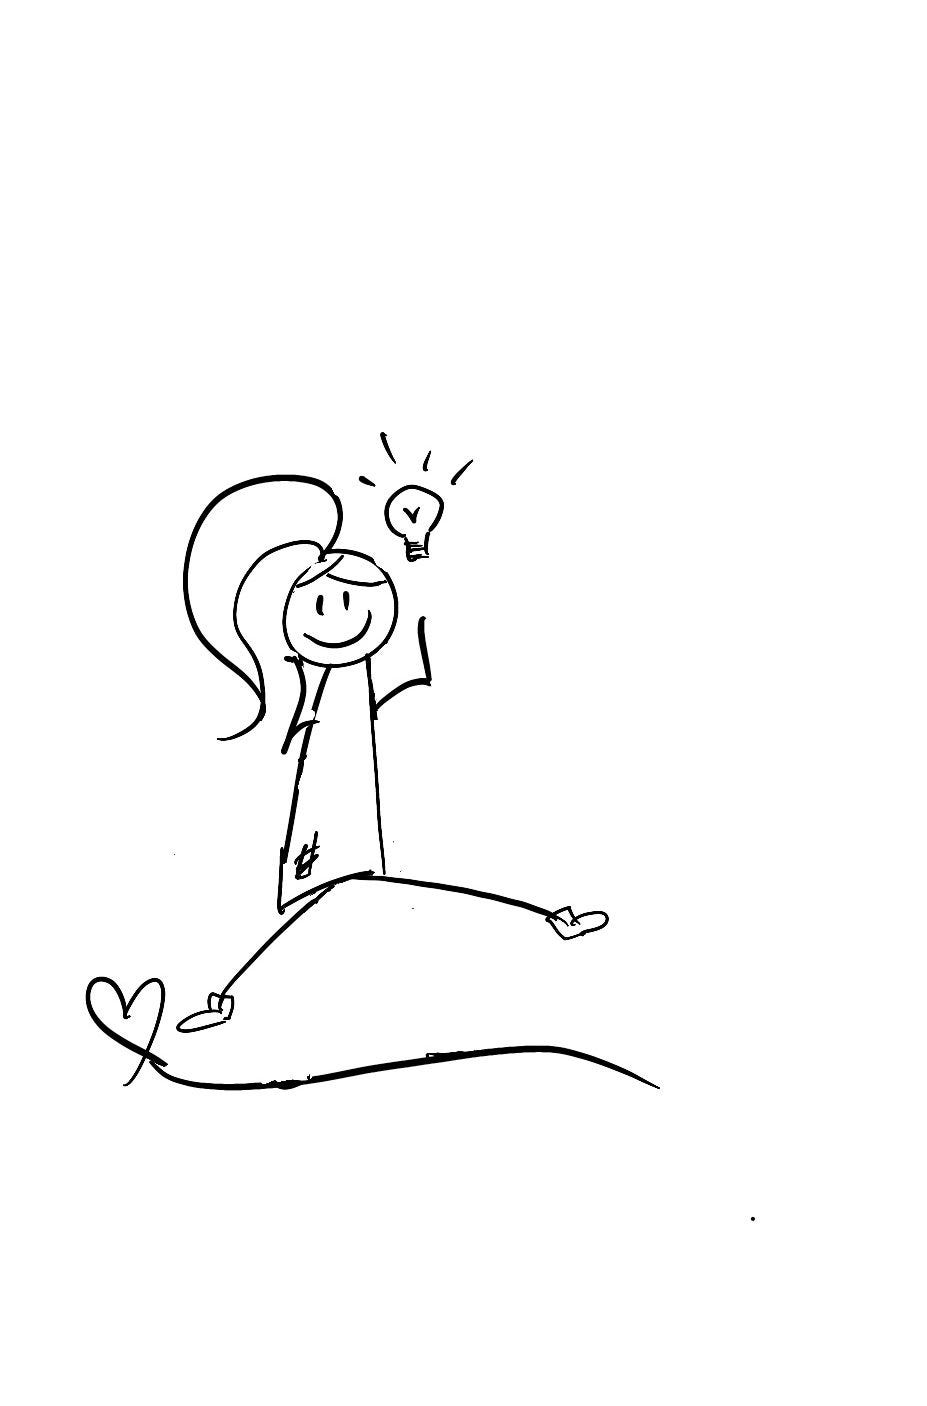 Stick figure Lilly is jumping up with joy with a lightbulb over her head